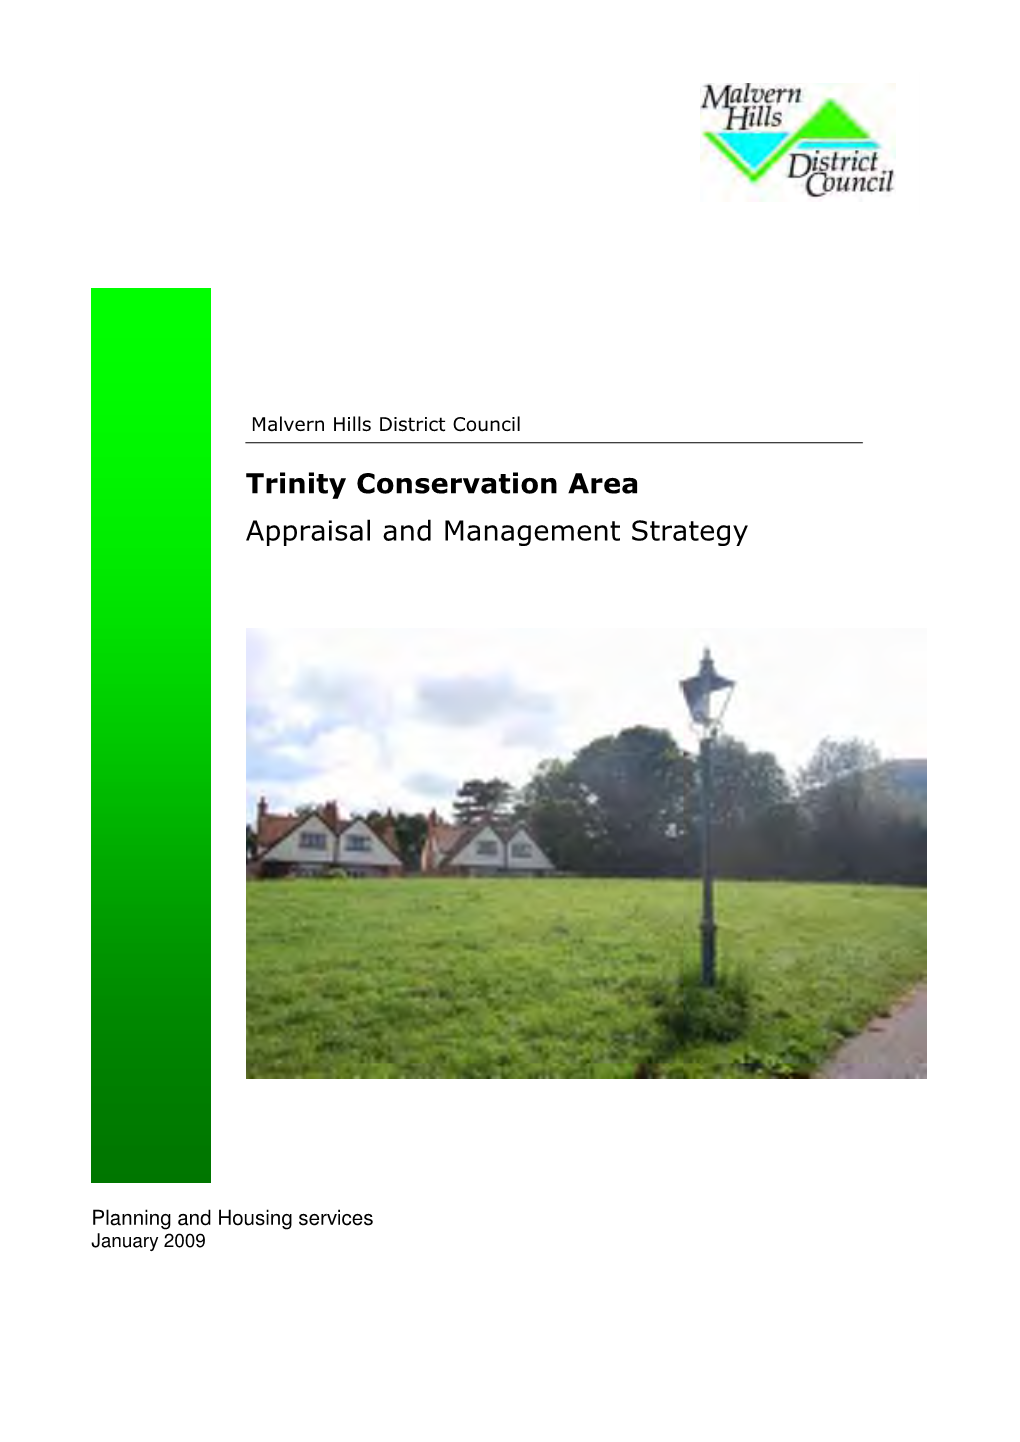 Trinity Conservation Area Appraisal and Management Strategy